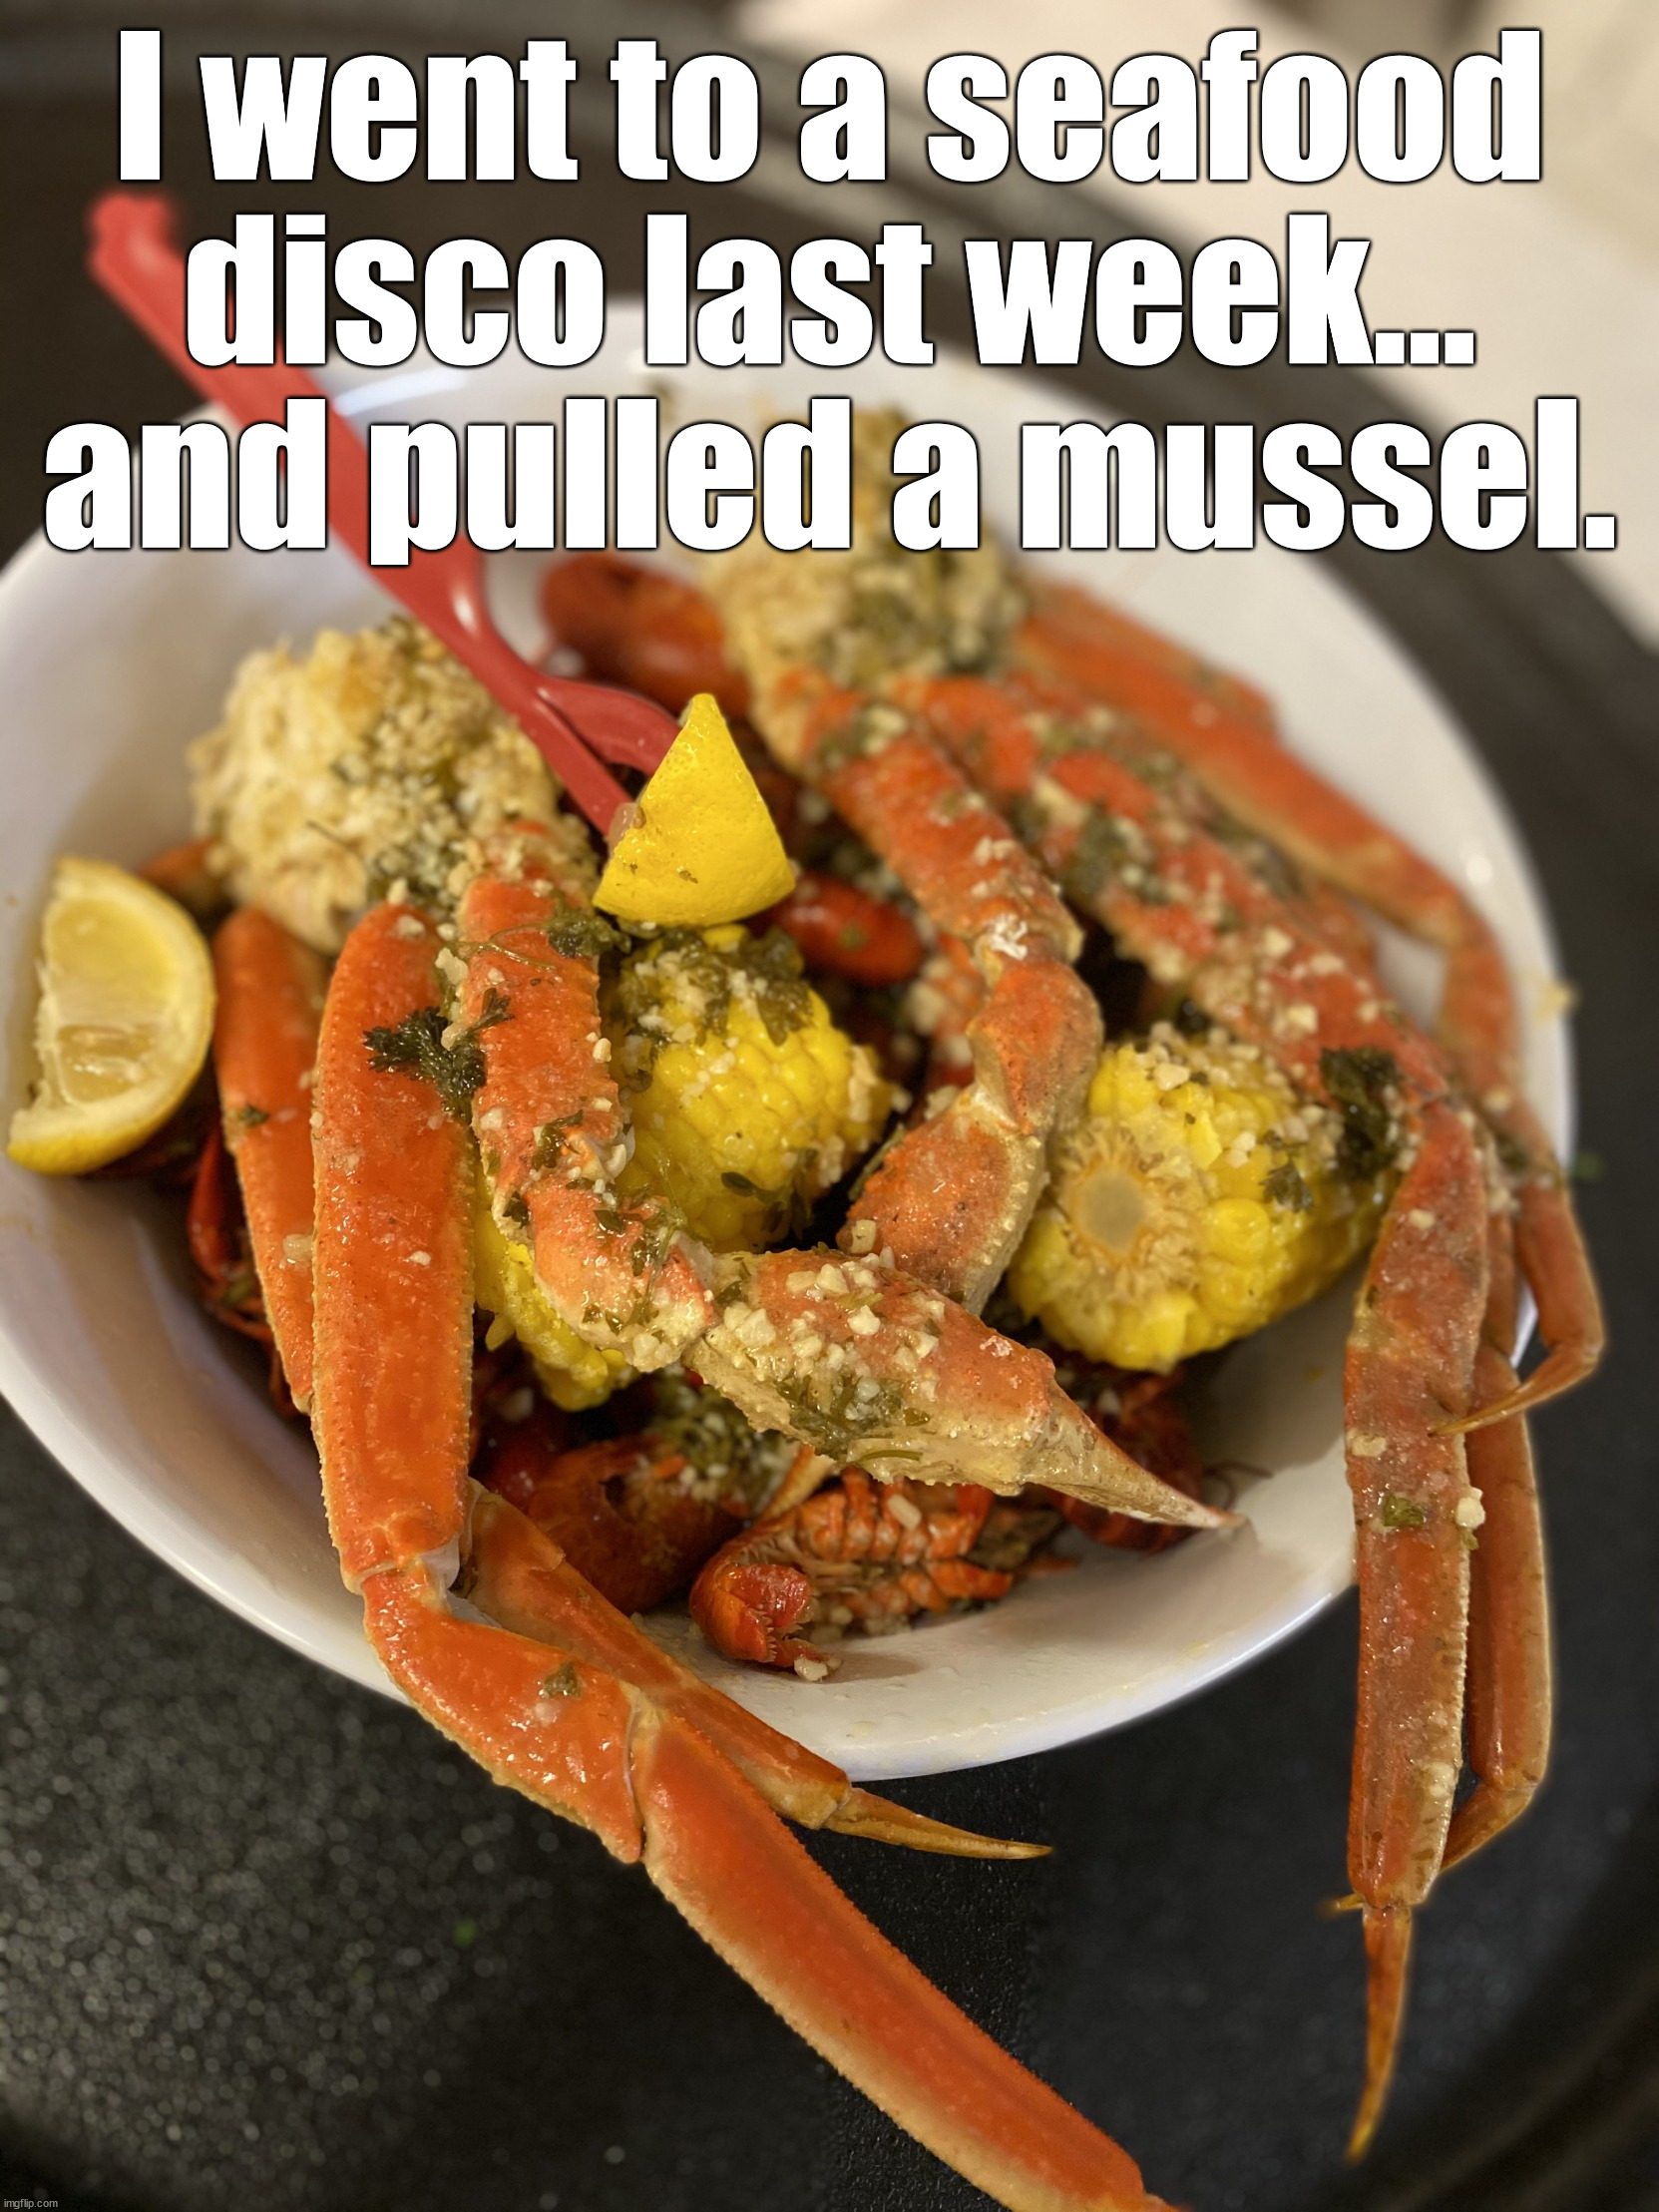 Seafood boil | I went to a seafood disco last week… and pulled a mussel. | image tagged in seafood boil,eye roll | made w/ Imgflip meme maker